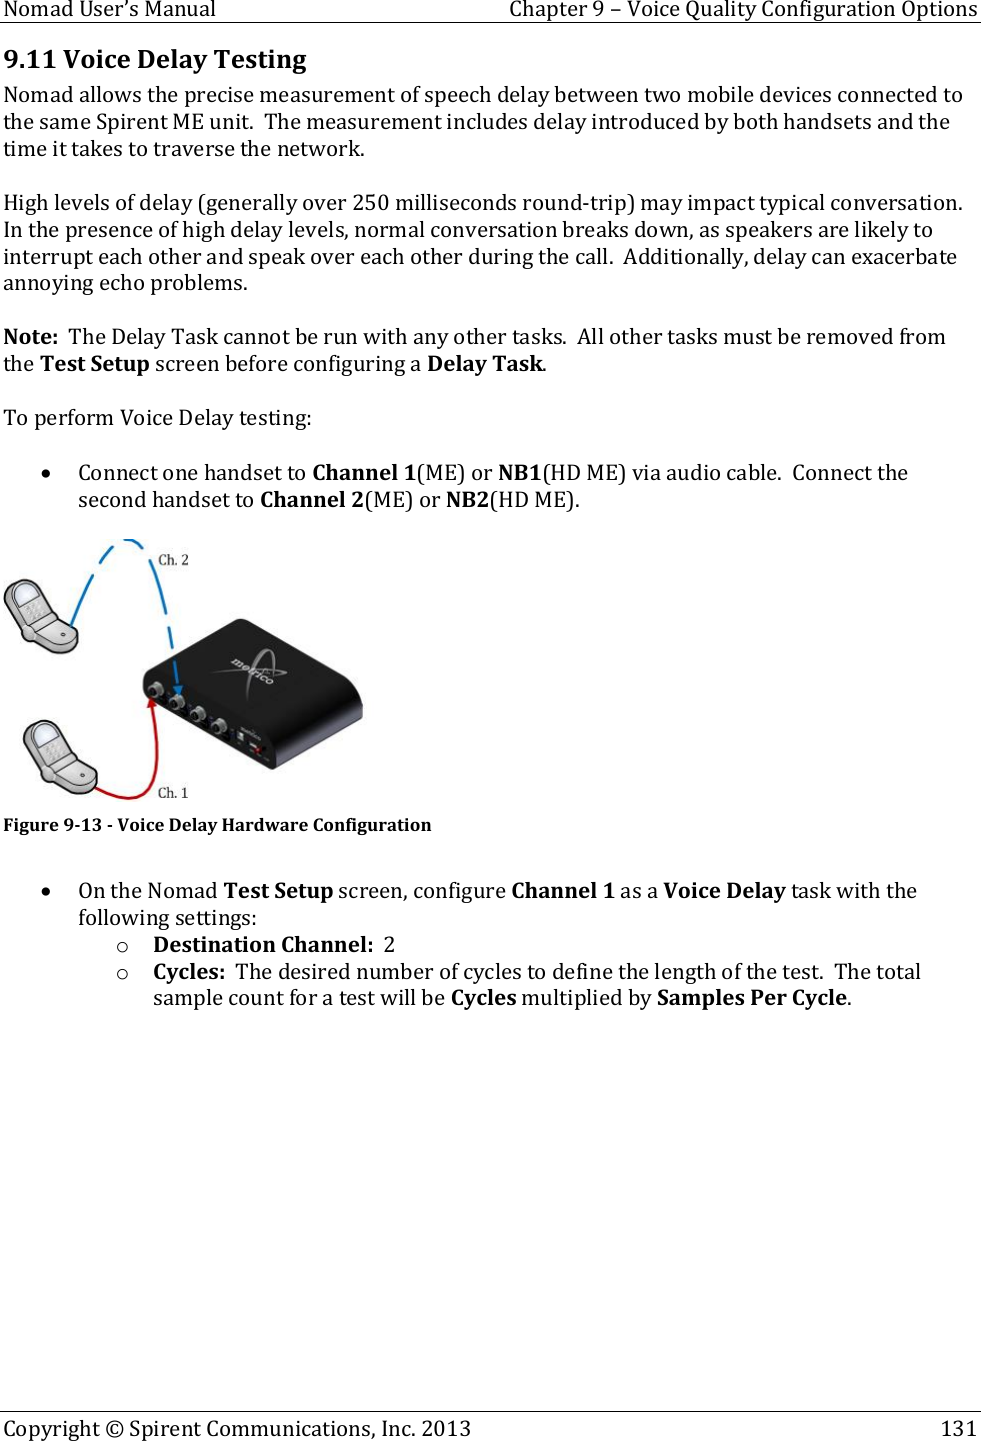  Nomad User’s Manual  Chapter 9 – Voice Quality Configuration Options Copyright © Spirent Communications, Inc. 2013    131  9.11 Voice Delay Testing Nomad allows the precise measurement of speech delay between two mobile devices connected to the same Spirent ME unit.  The measurement includes delay introduced by both handsets and the time it takes to traverse the network.    High levels of delay (generally over 250 milliseconds round-trip) may impact typical conversation.  In the presence of high delay levels, normal conversation breaks down, as speakers are likely to interrupt each other and speak over each other during the call.  Additionally, delay can exacerbate annoying echo problems.  Note:  The Delay Task cannot be run with any other tasks.  All other tasks must be removed from the Test Setup screen before configuring a Delay Task.    To perform Voice Delay testing:   Connect one handset to Channel 1(ME) or NB1(HD ME) via audio cable.  Connect the second handset to Channel 2(ME) or NB2(HD ME).   Figure 9-13 - Voice Delay Hardware Configuration   On the Nomad Test Setup screen, configure Channel 1 as a Voice Delay task with the following settings: o Destination Channel:  2 o Cycles:  The desired number of cycles to define the length of the test.  The total sample count for a test will be Cycles multiplied by Samples Per Cycle.  